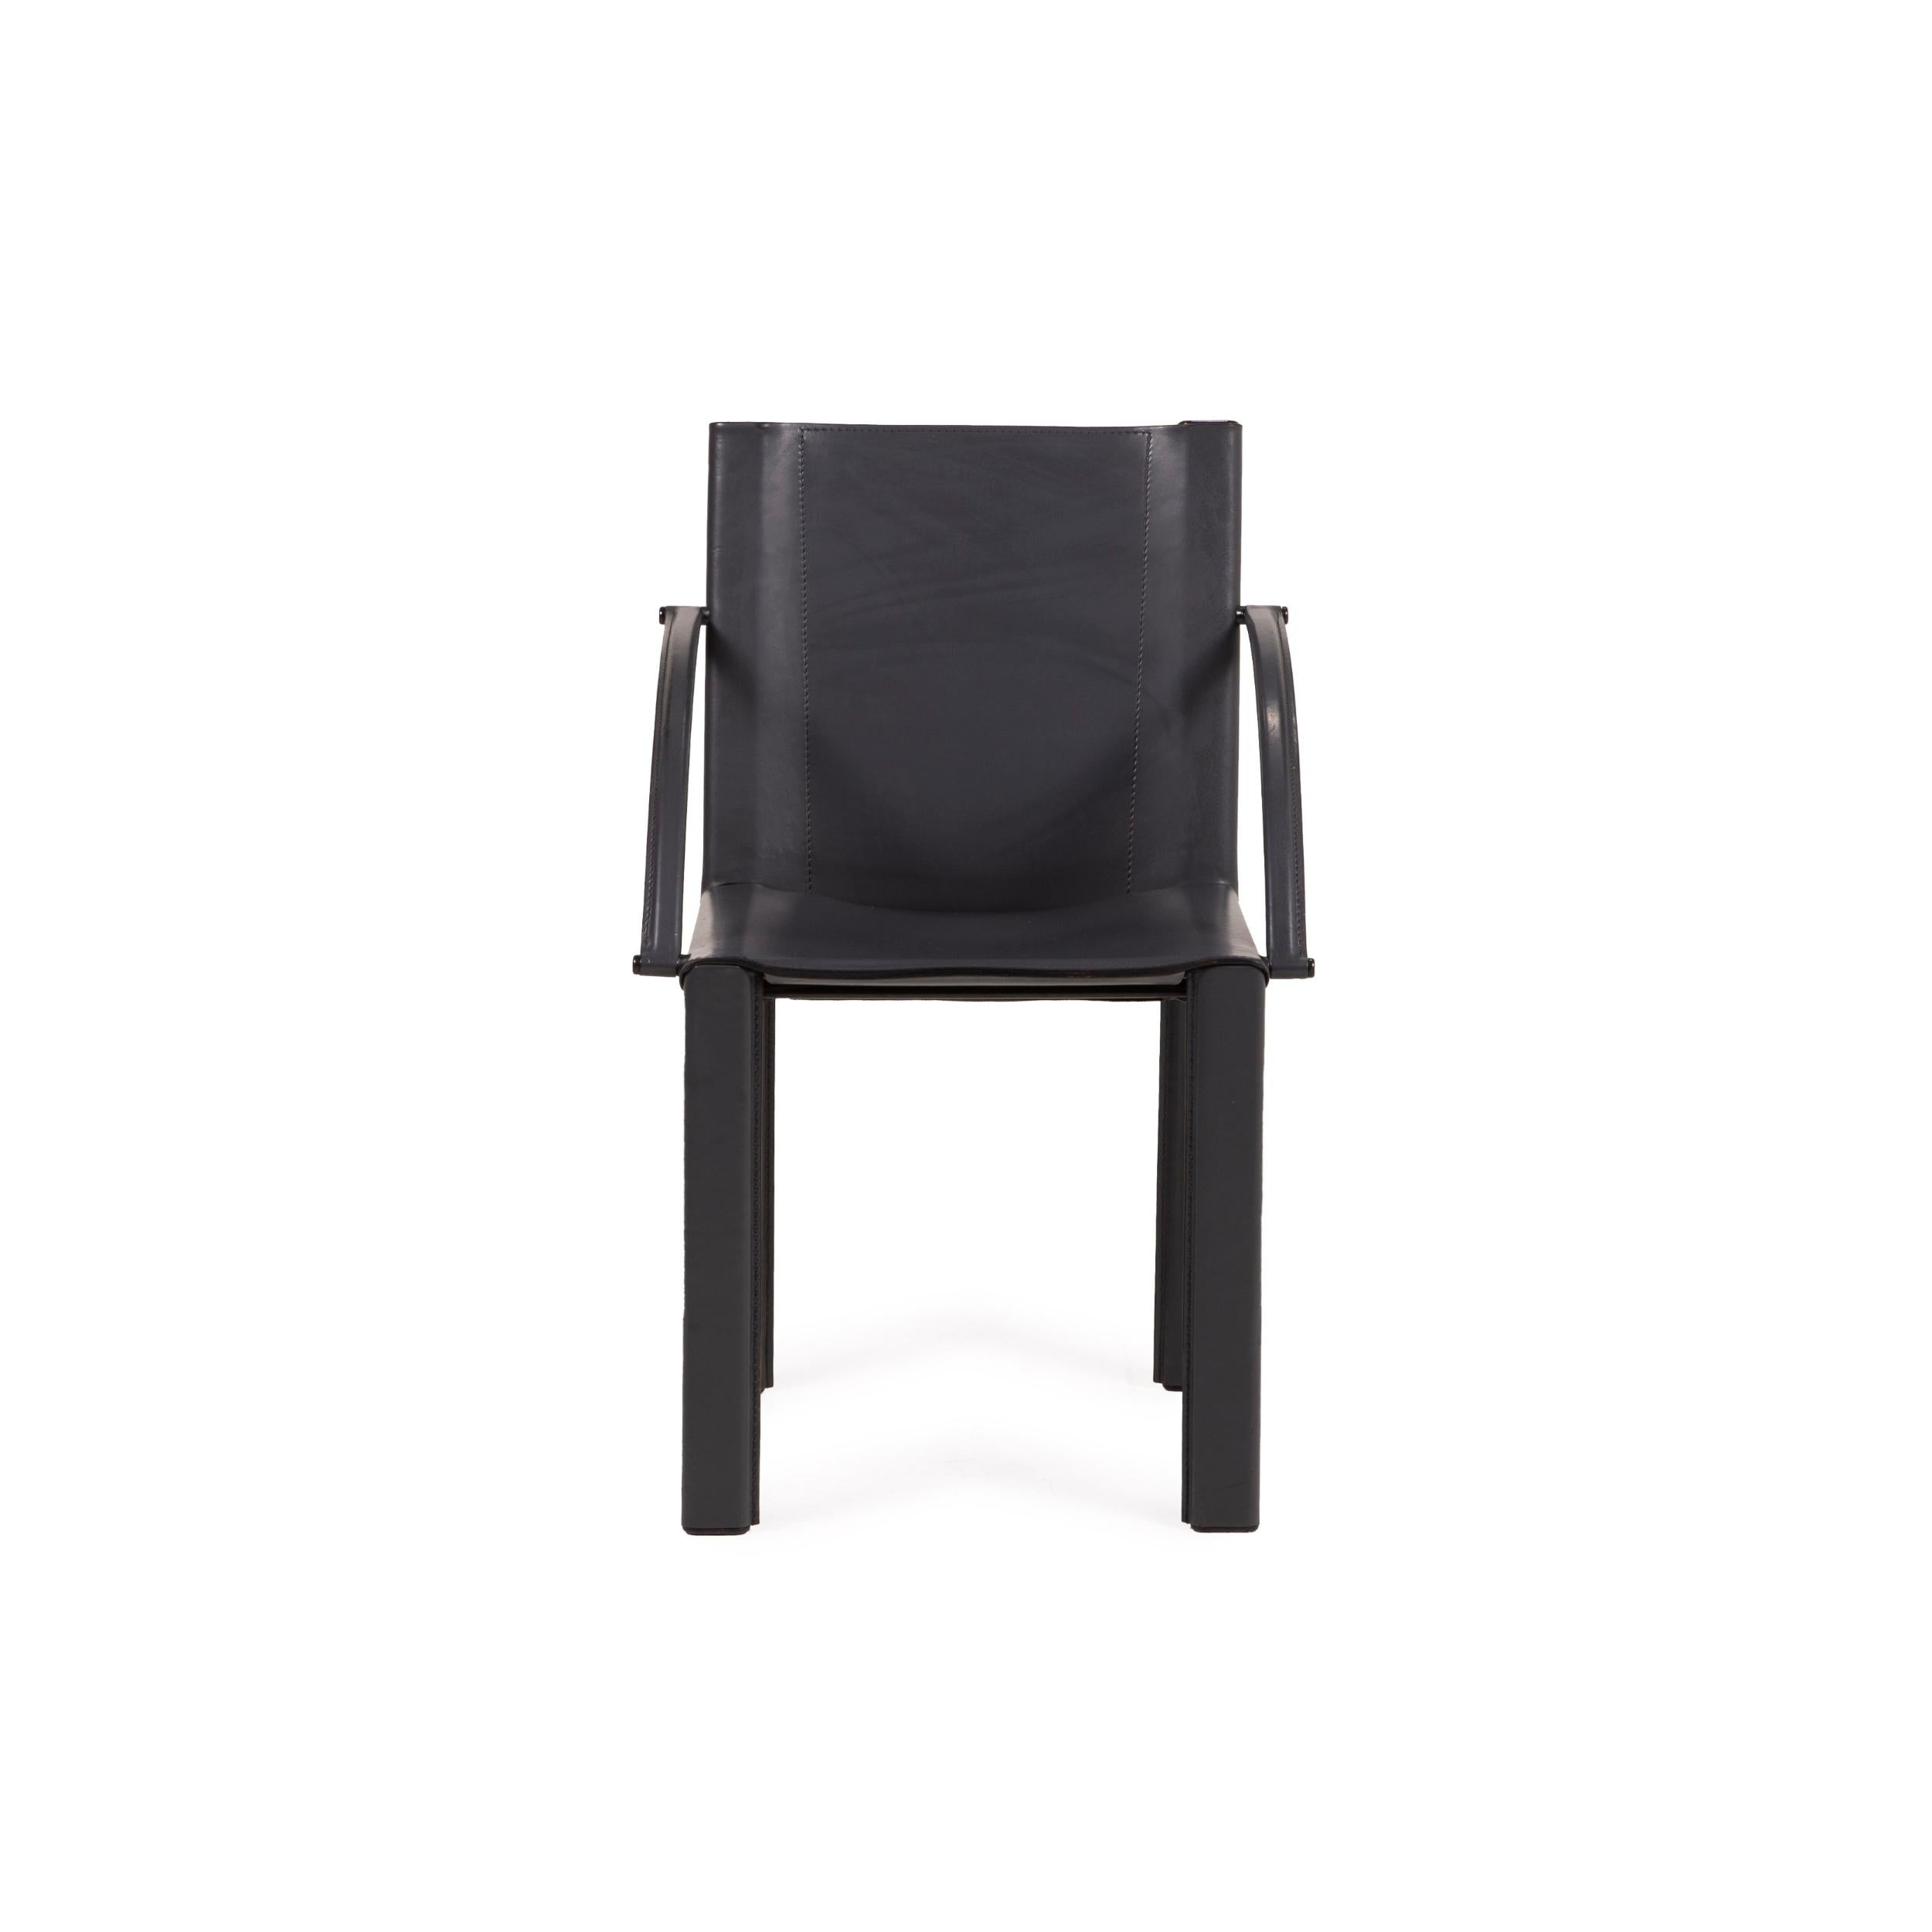 Matteo Grassi Leather Chair Black Vintage Armchair For Sale 1